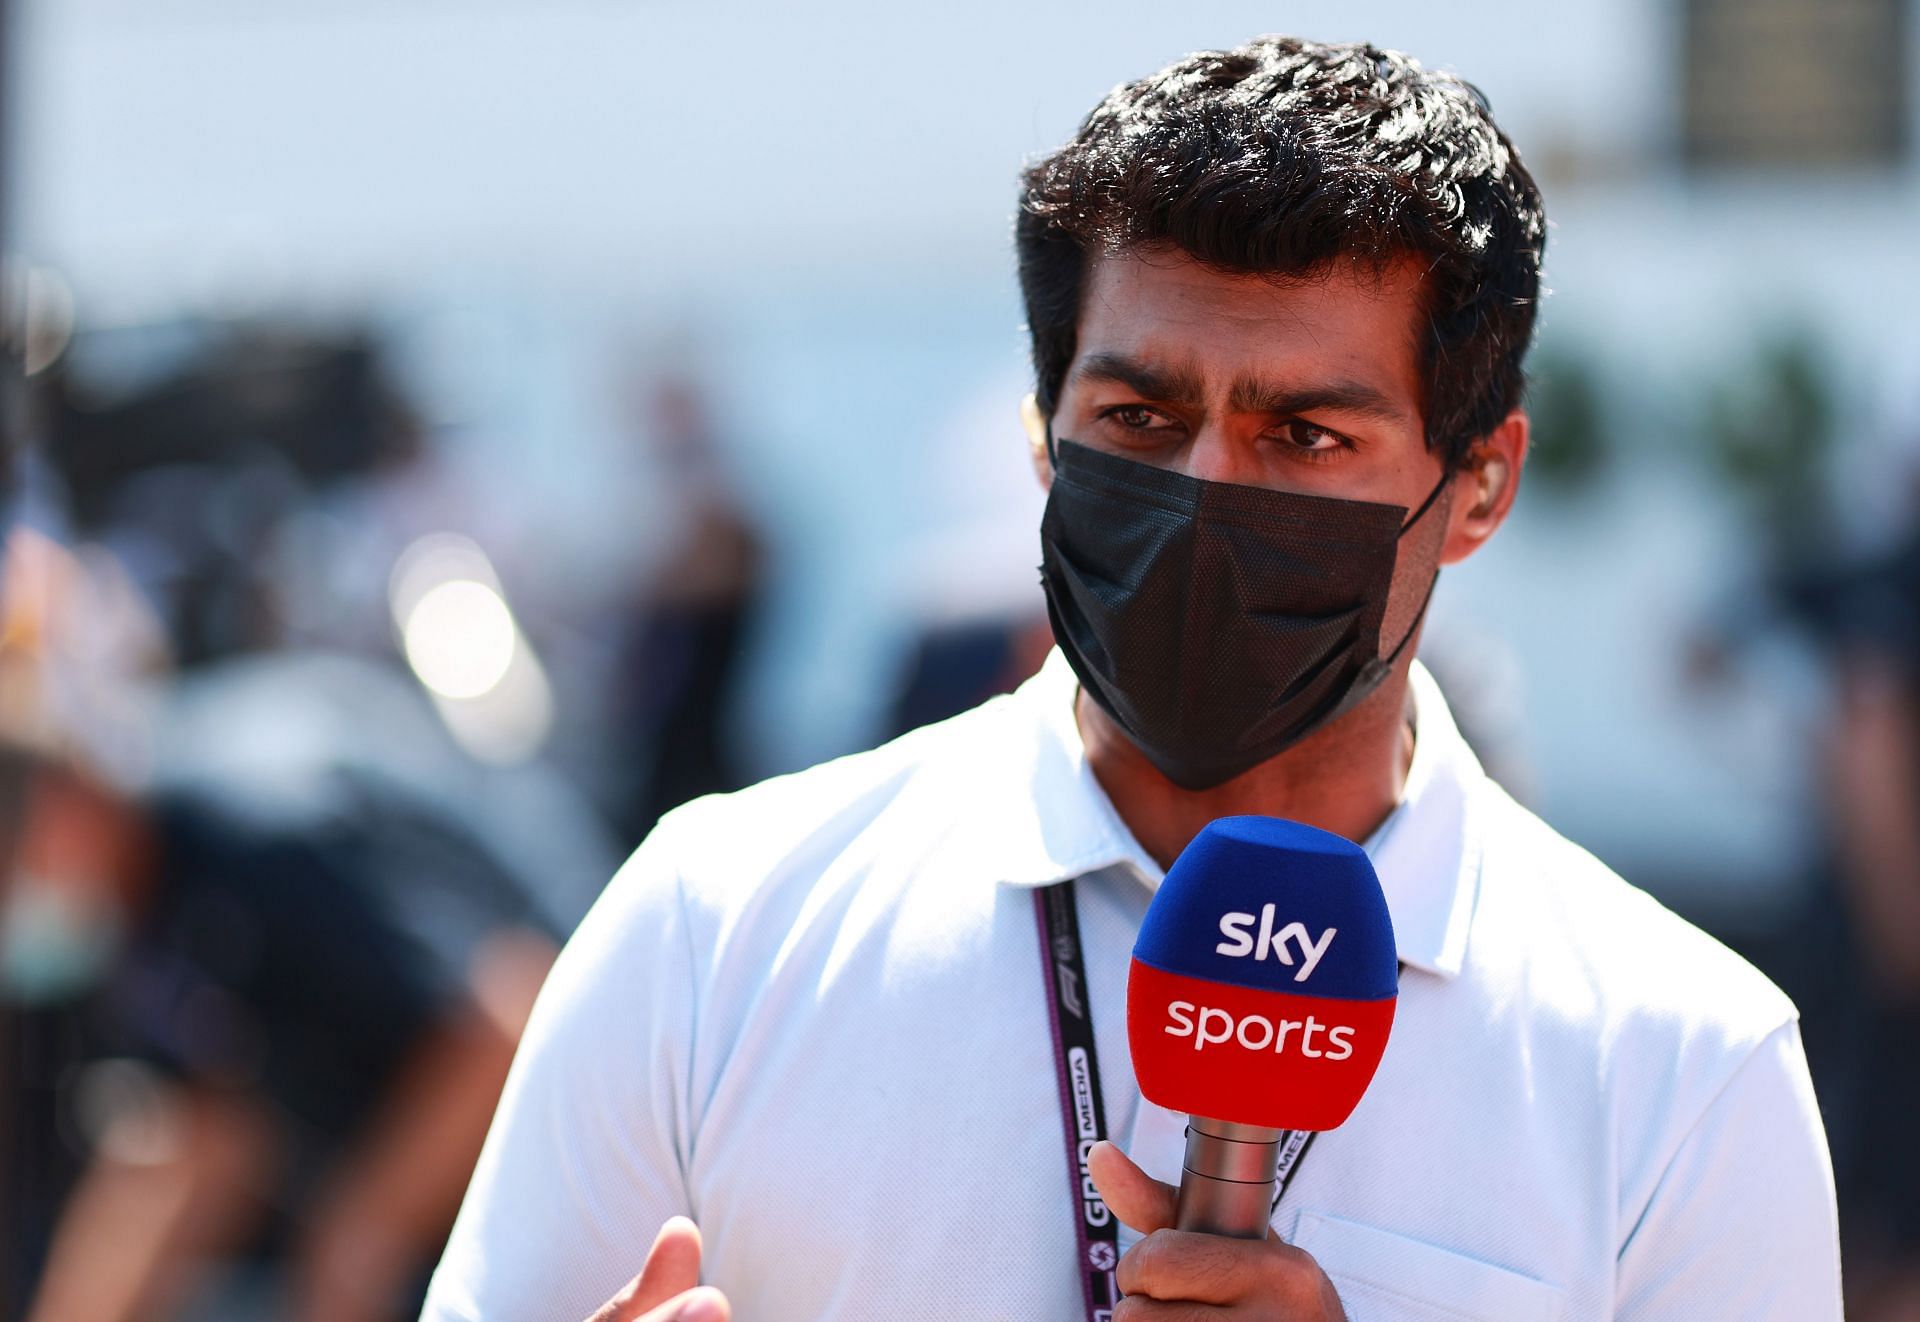 F1 Grand Prix of Hungary - Karun Chandhok on Sky Sports F1 (Photo by Mark Thompson/Getty Images)